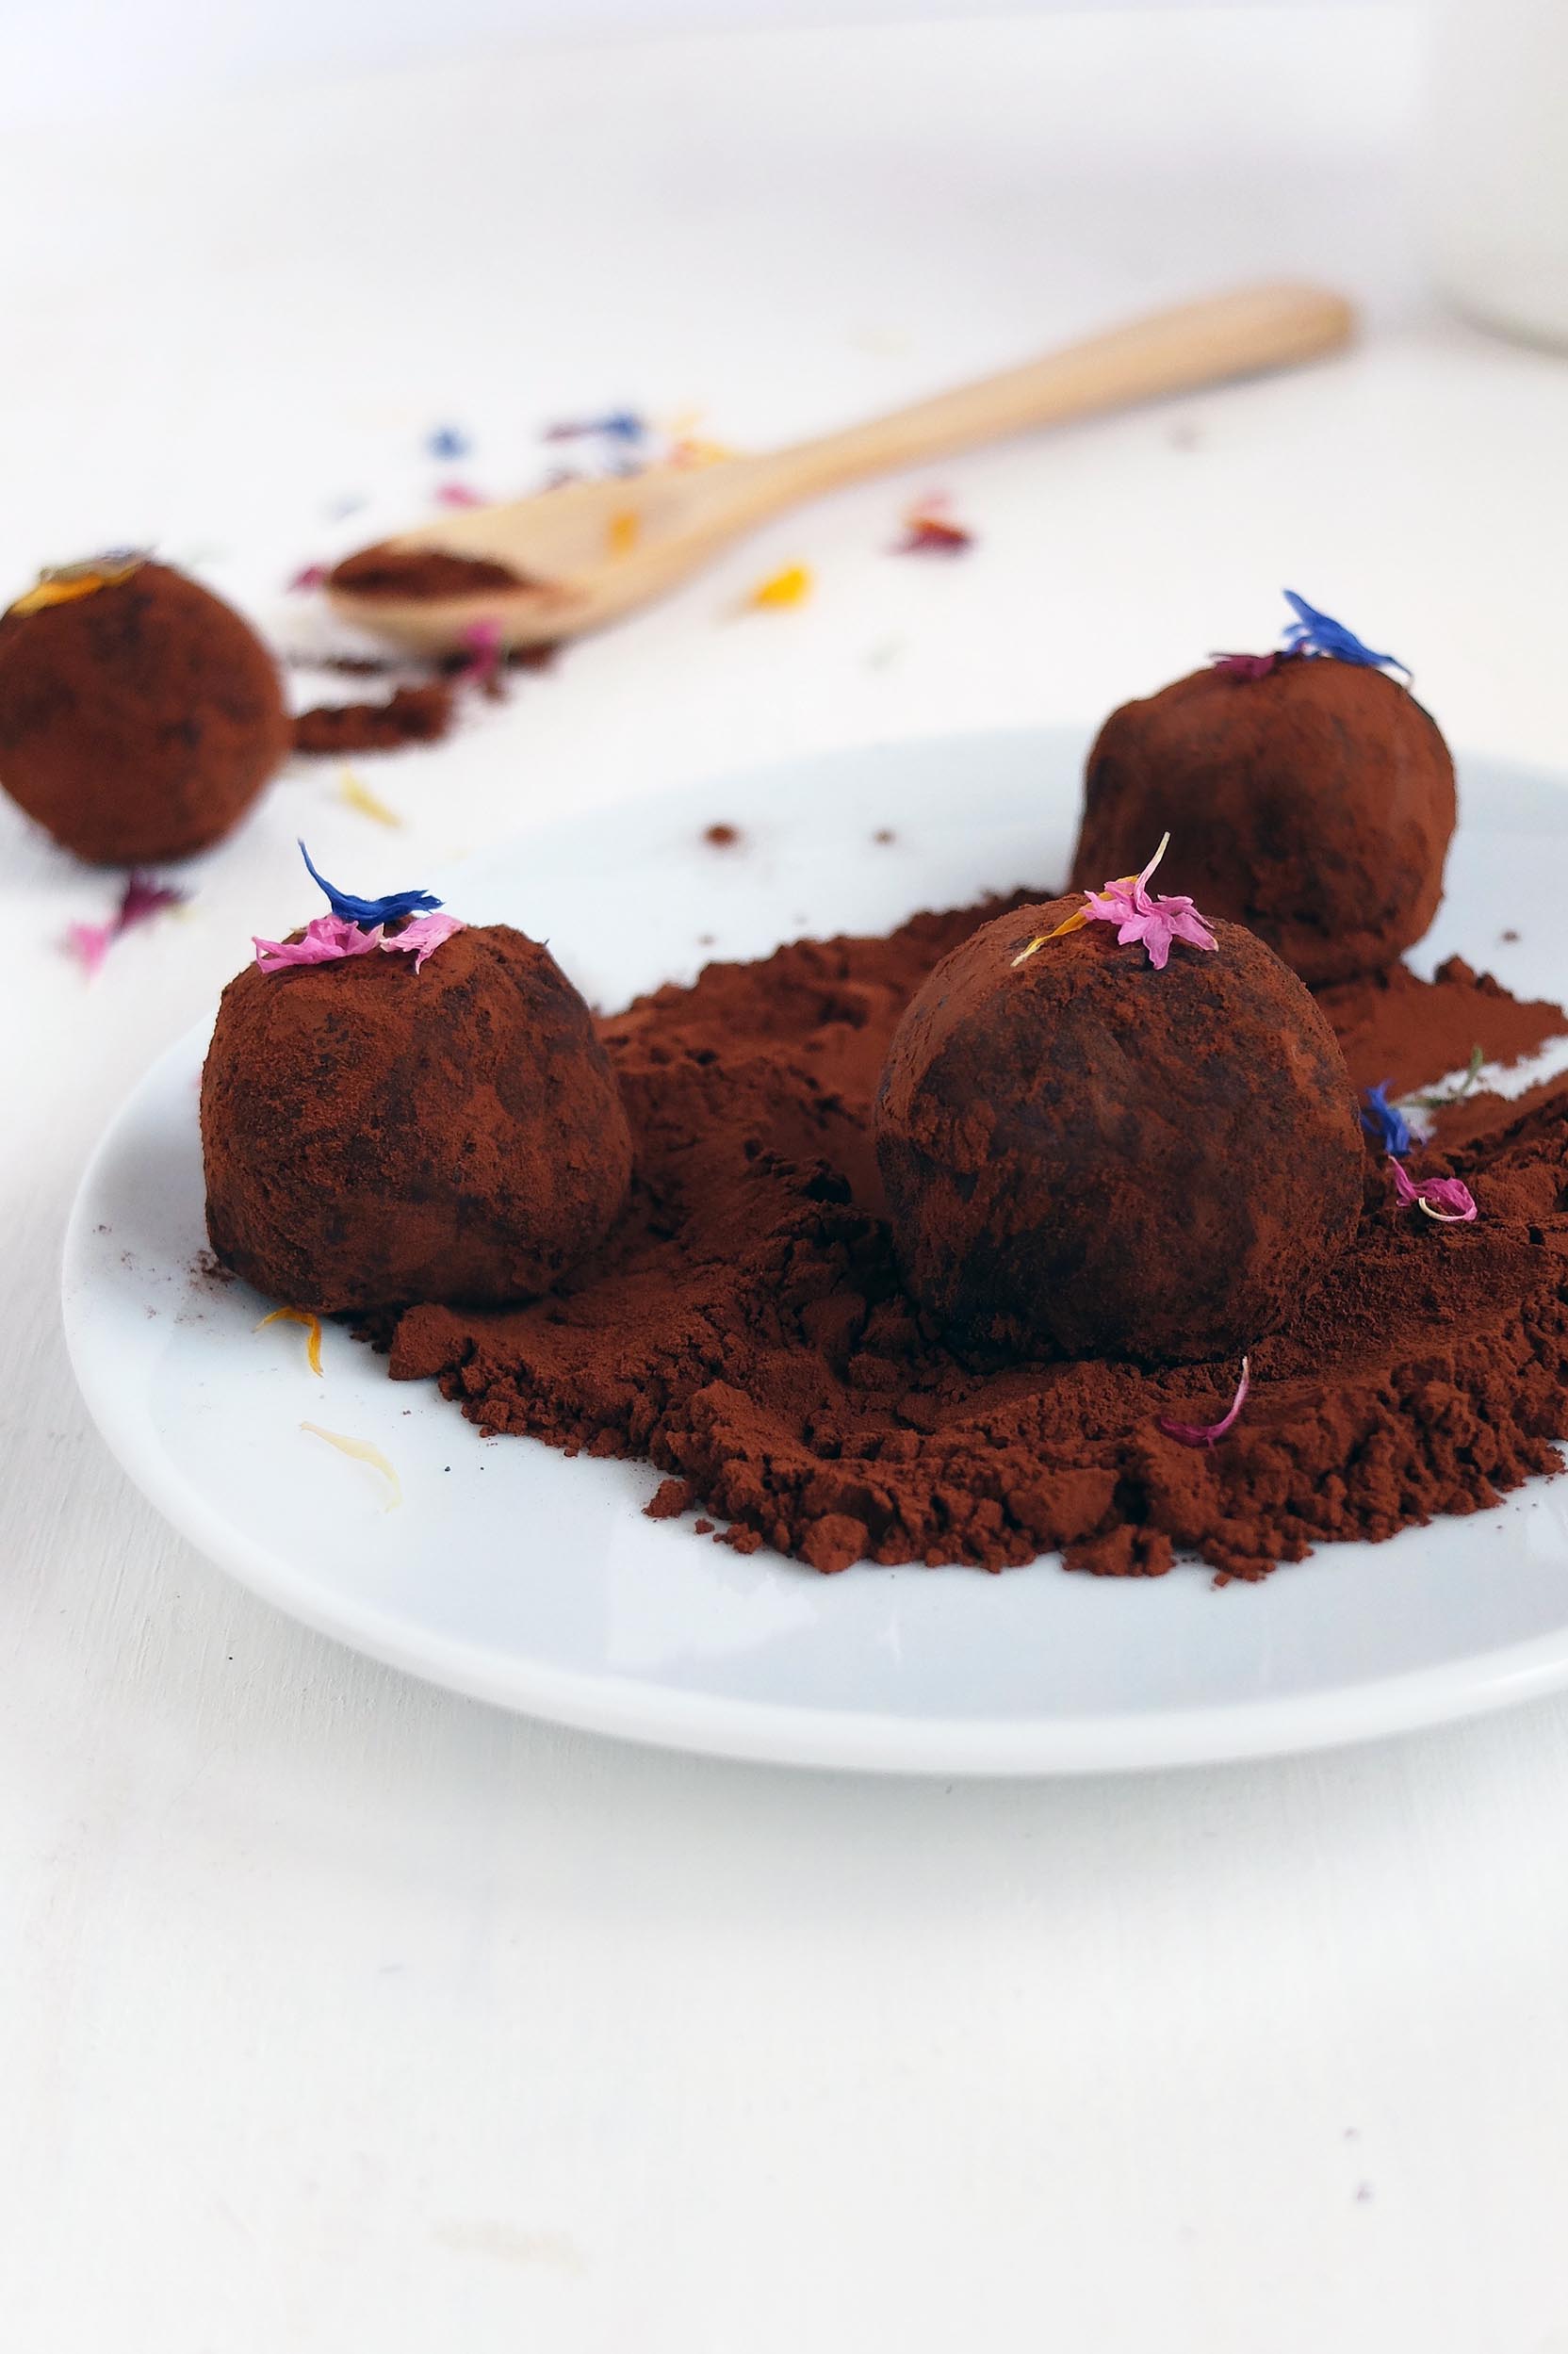 Healthy Chocolate truffles made in just 10 minutes